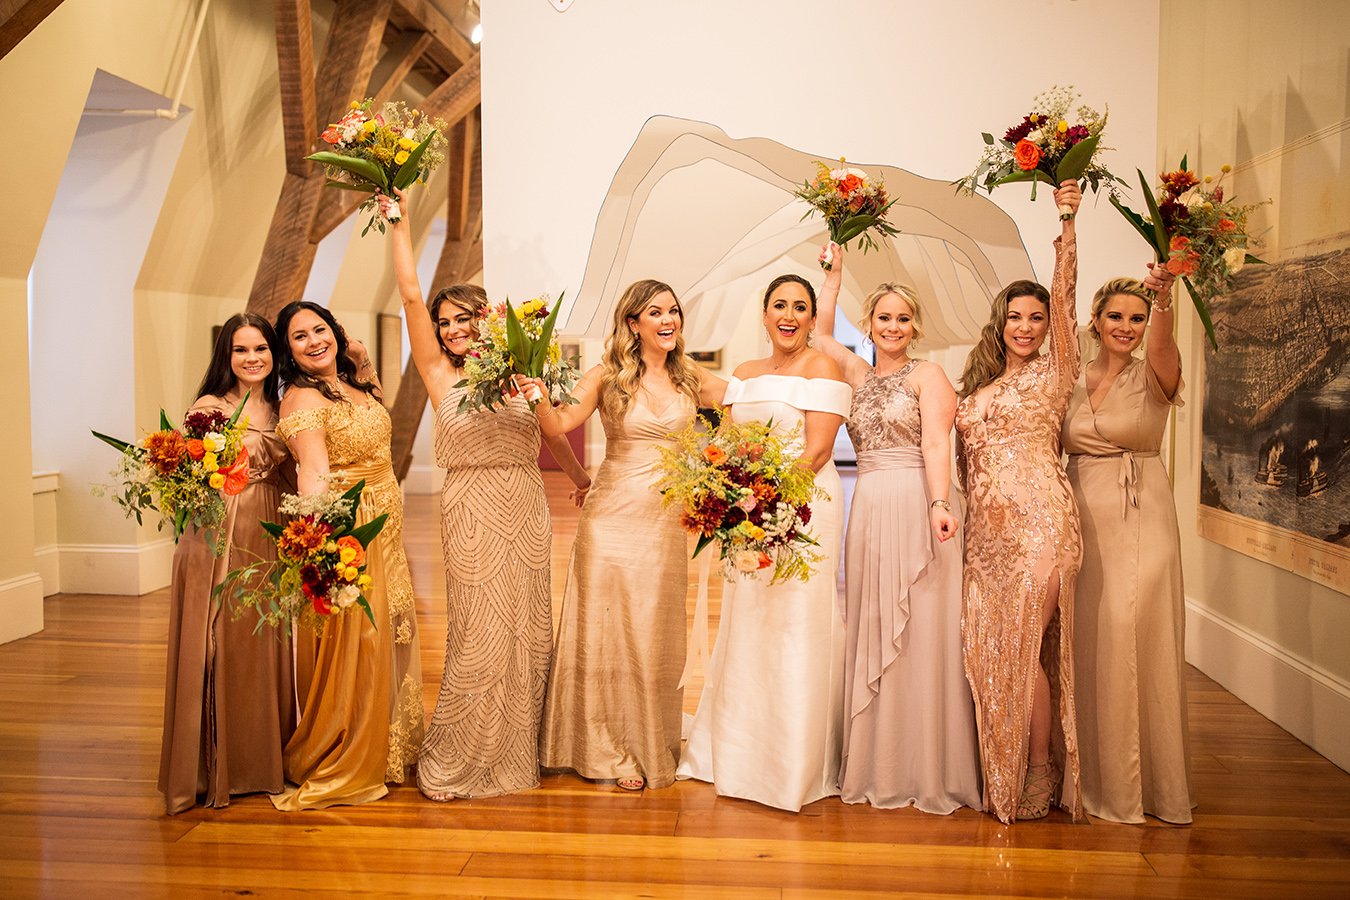 Susan's bridesmaids each wore a different style dress within a warm golden and blush color palette.